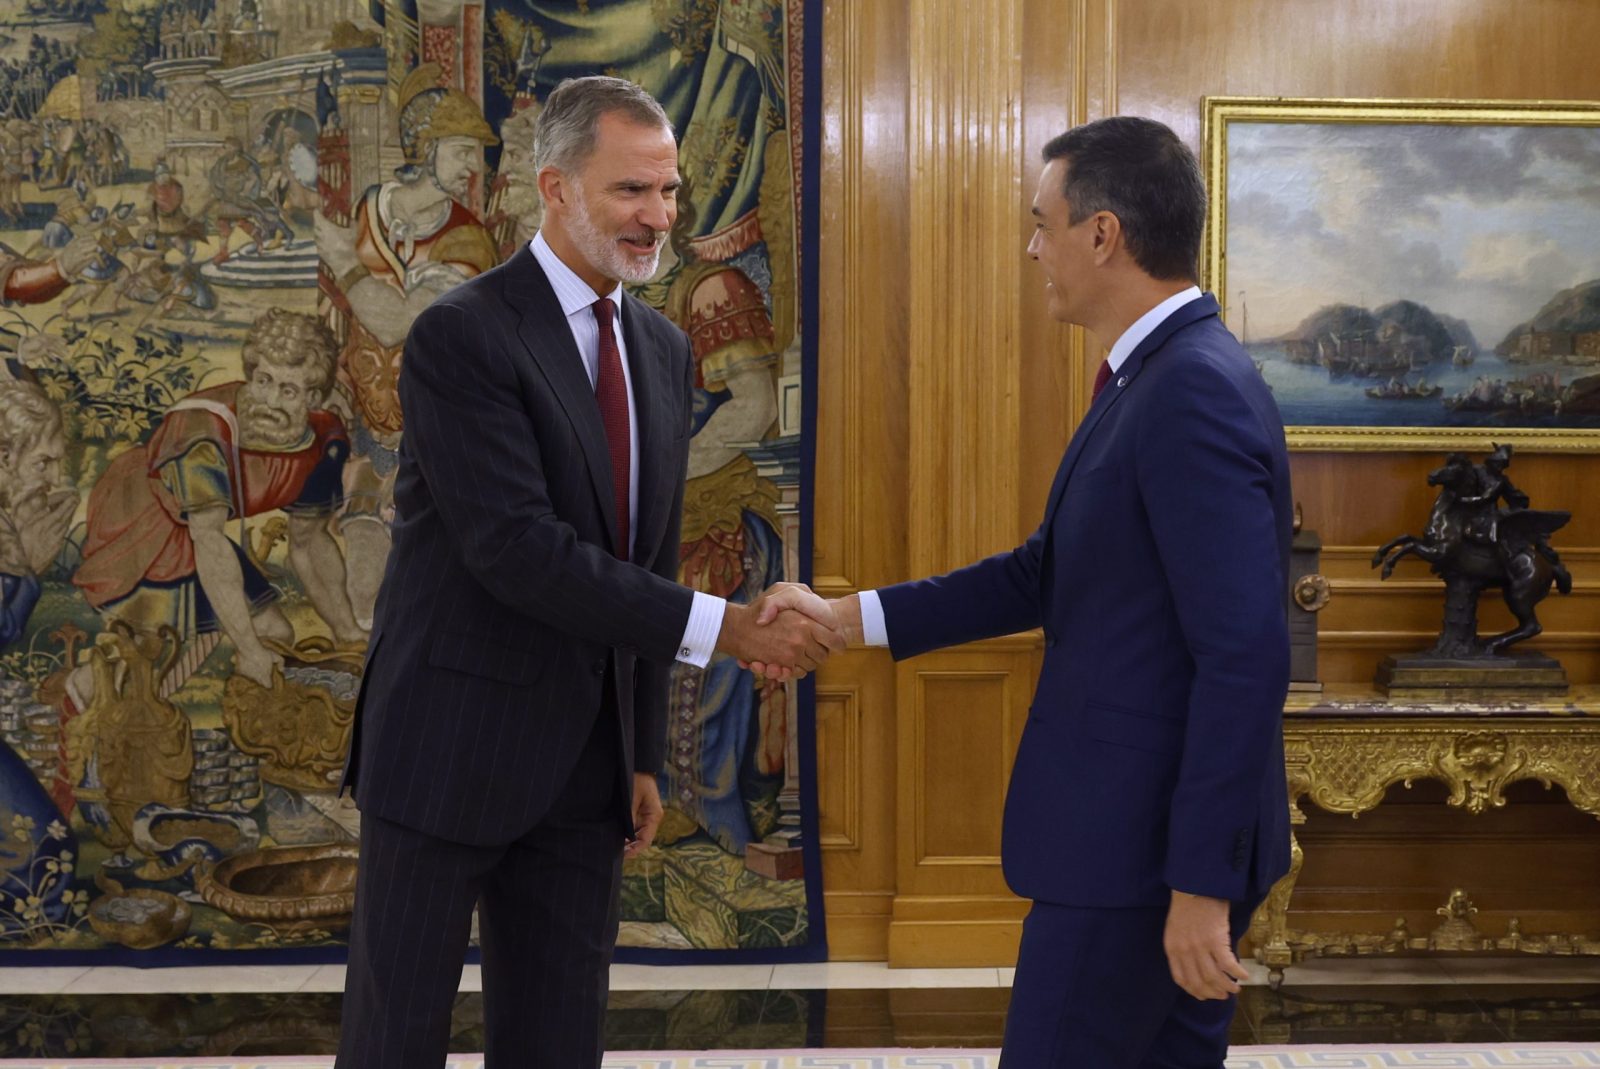 epa10896735 Spain's King Felipe VI (L) meets acting Spanish Prime Minister and General Secretary of Spanish socialist party PSOE Pedro Sanchez (R) at Zarzuela Palace in Madrid, Spain, 03 October 2023. Spain's King Felipe VI began a new round of meetings with leaders of political parties to designate a new candidate for prime minister's post after the failed investiture of the leader of the People's Party (PP) Alberto Nunez Feijoo.  EPA/FERNANDO ALVARADO / POOL POOL